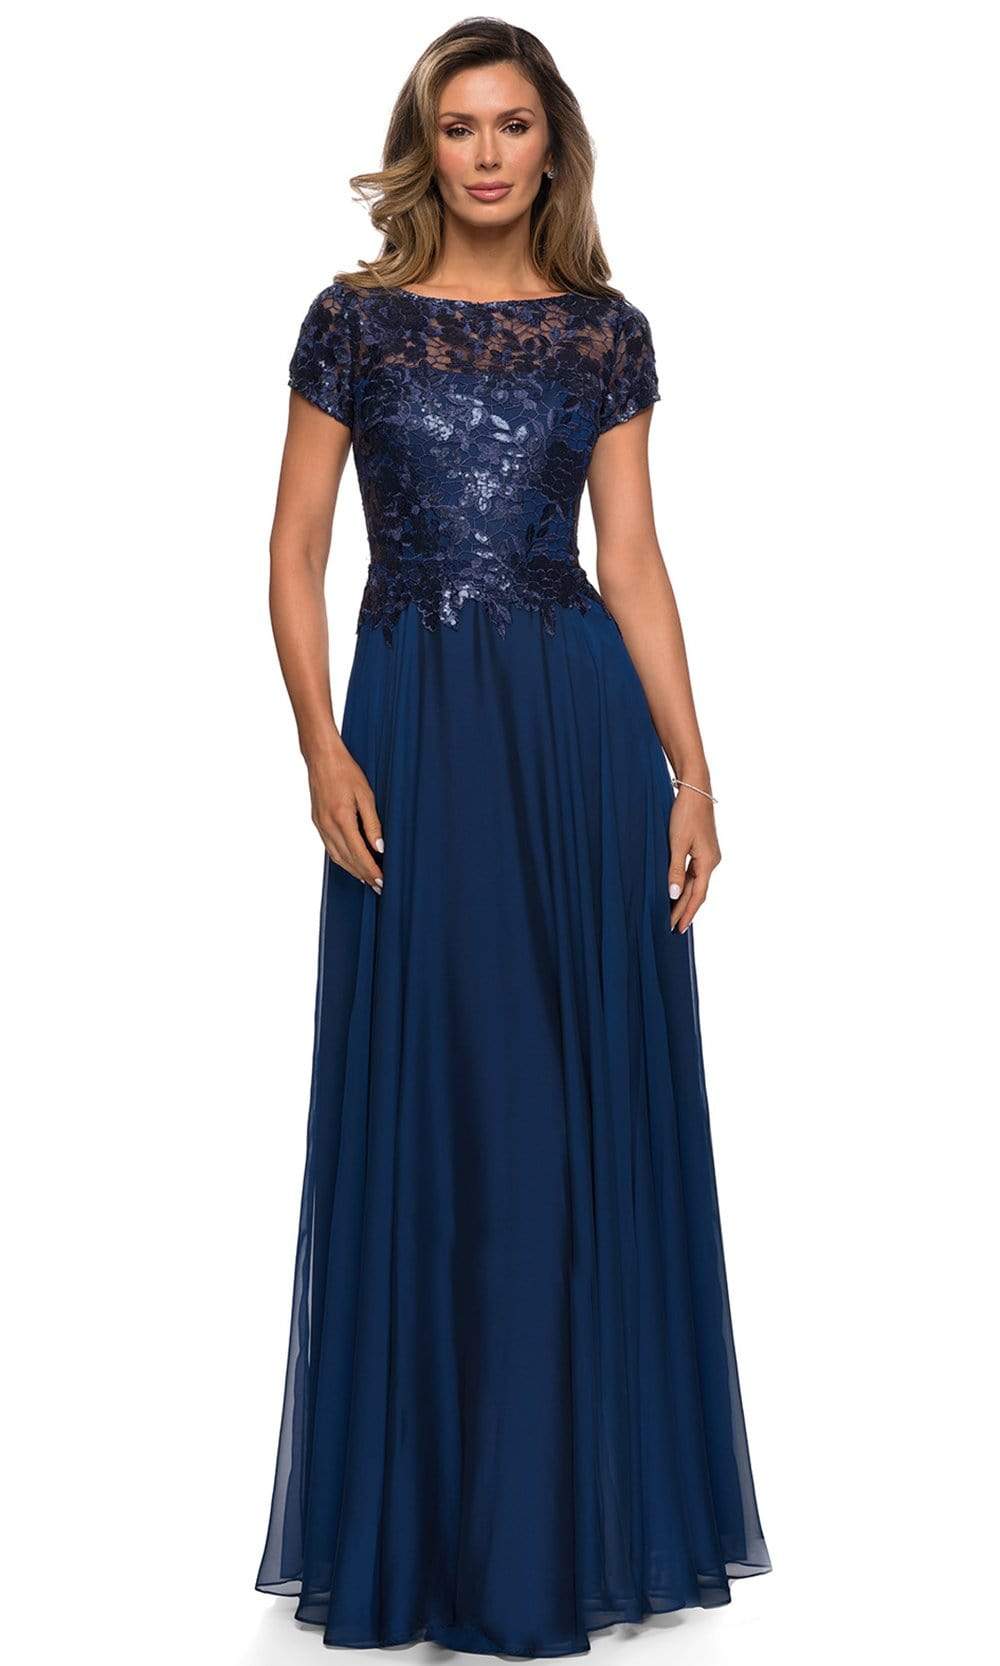 Image of La Femme - 27924 Sequined Lace A-Line Mother of the Bride Dress